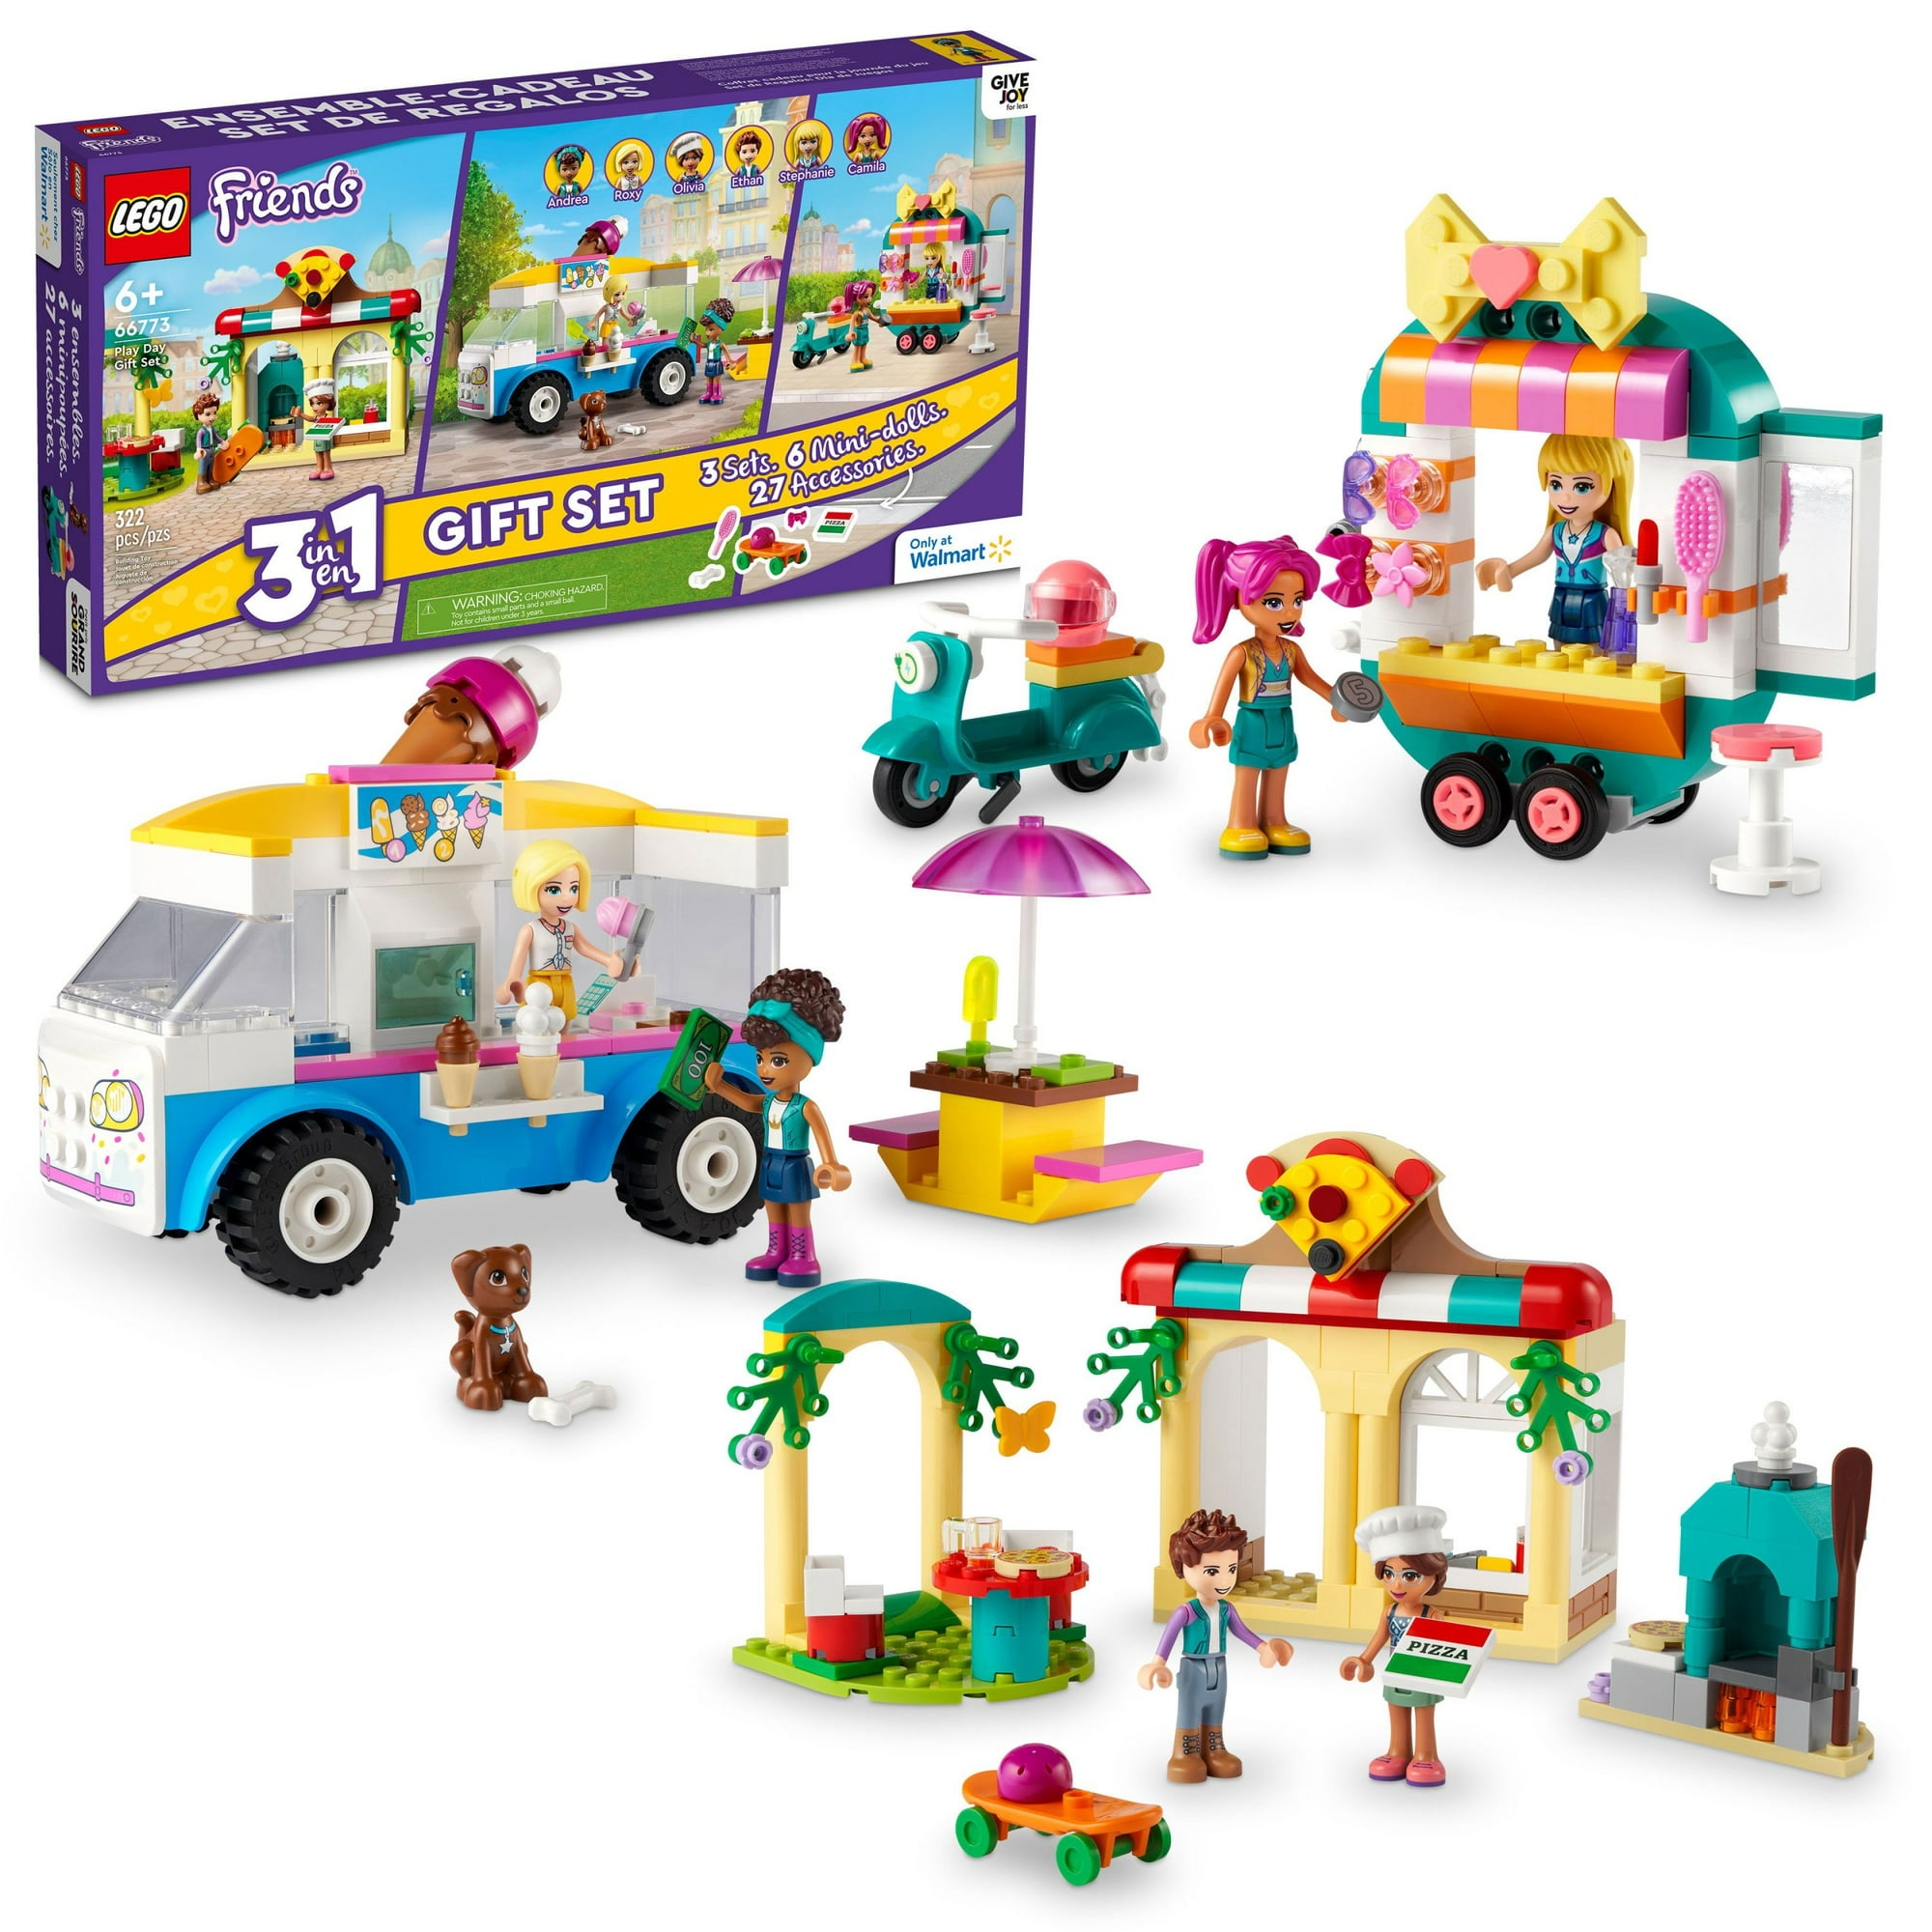 LEGO Friends Play Day Gift Set 66773, 3in1 Building Set, Toy for 6+ Year Old Girls and Boys, Includes Ice Cream Truck, Mobile Fashion Boutique, and Pizzeria